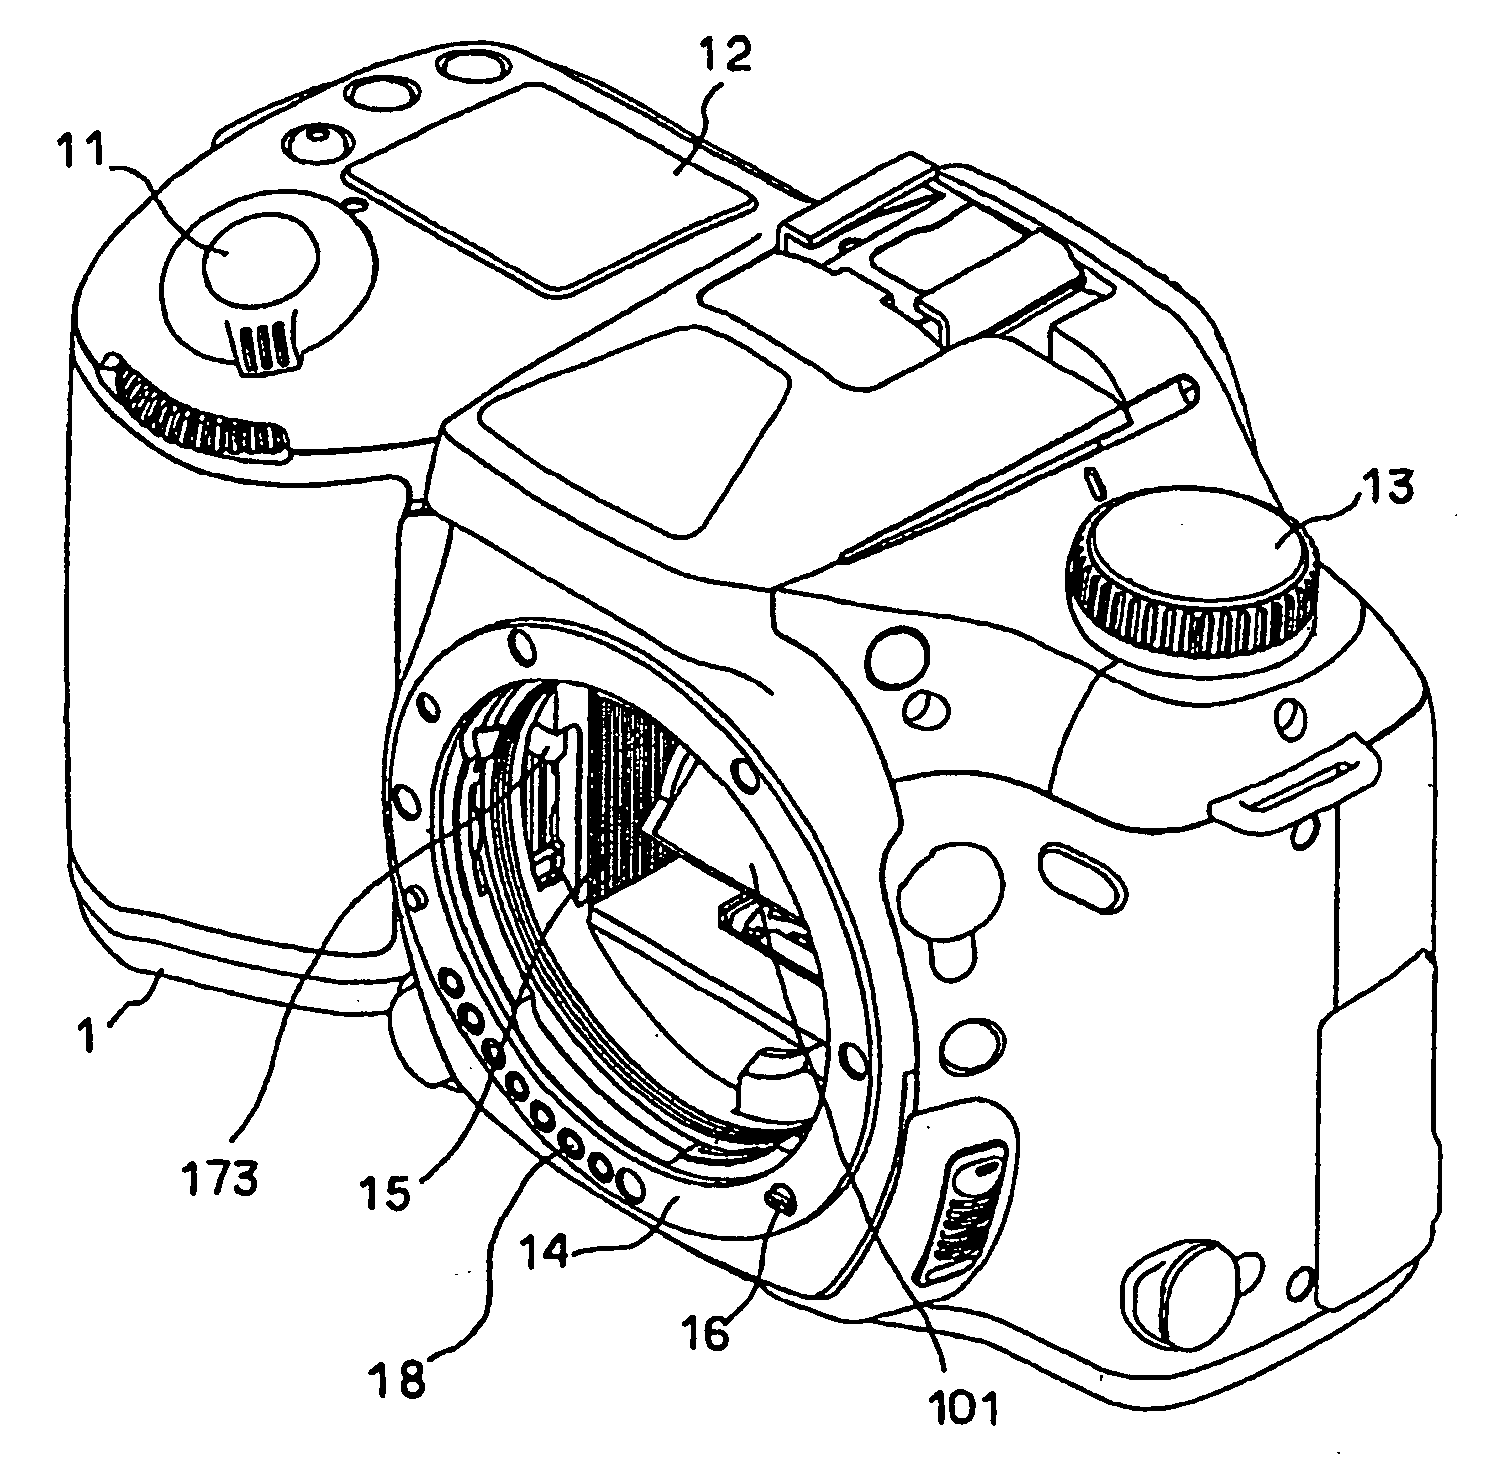 Diaphragm driving device of a camera system using an interchangeable lens